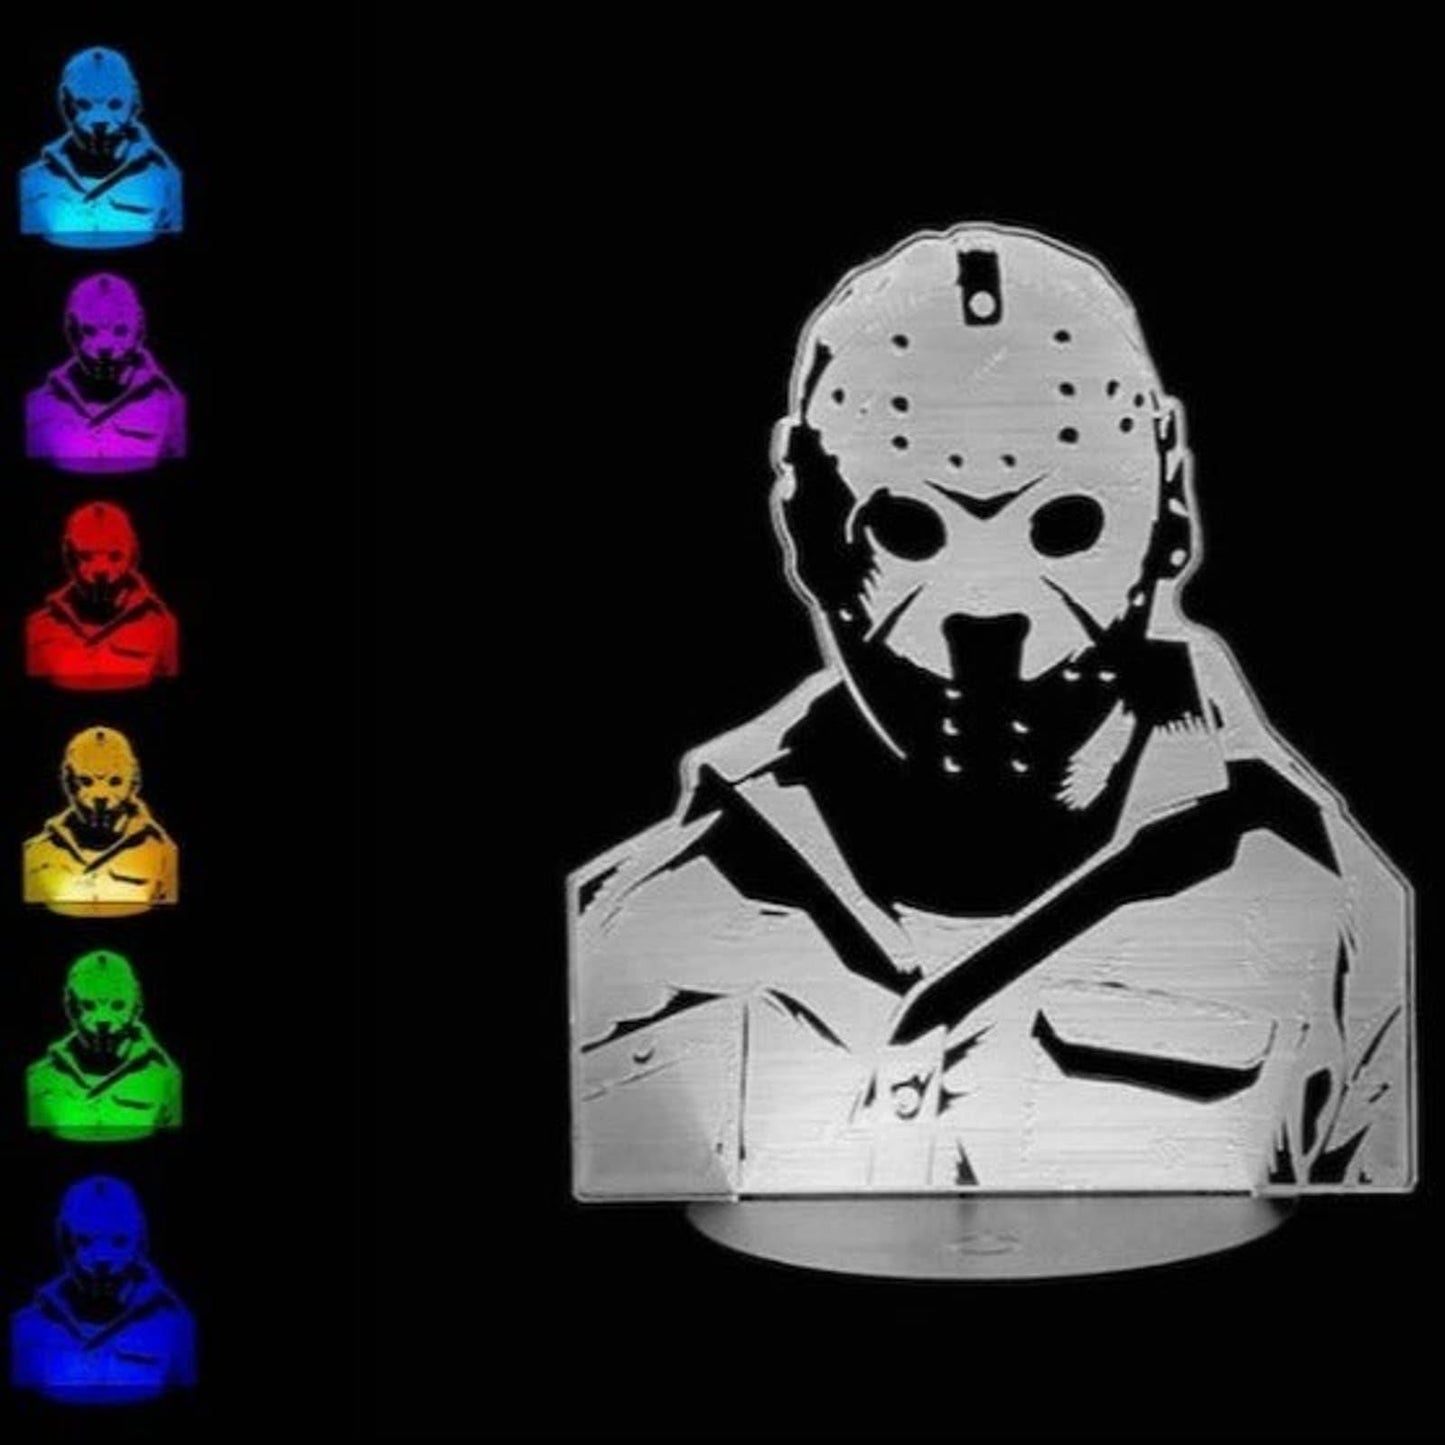 Jason - Friday the 13th 3D LED Night-Light 7 Color Changing Lamp w/ Touch Switch